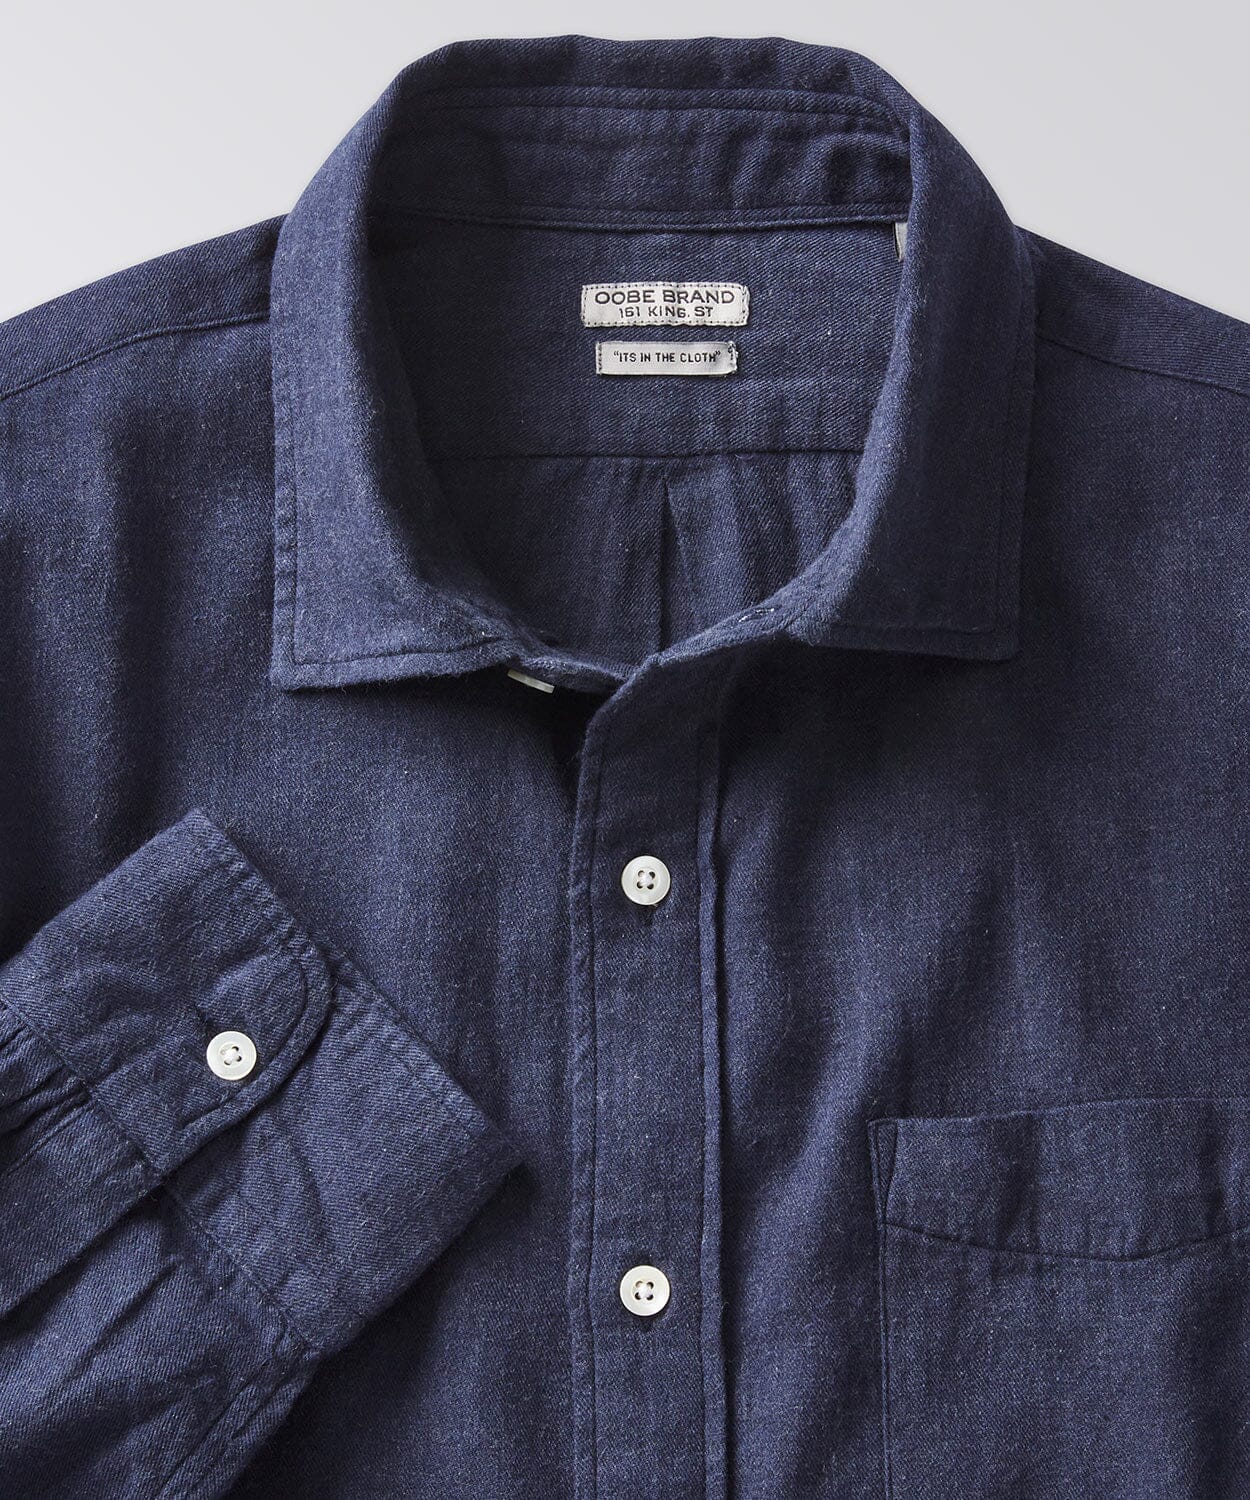 Excella Brushed Heather Solid Shirt Button Downs OOBE BRAND 